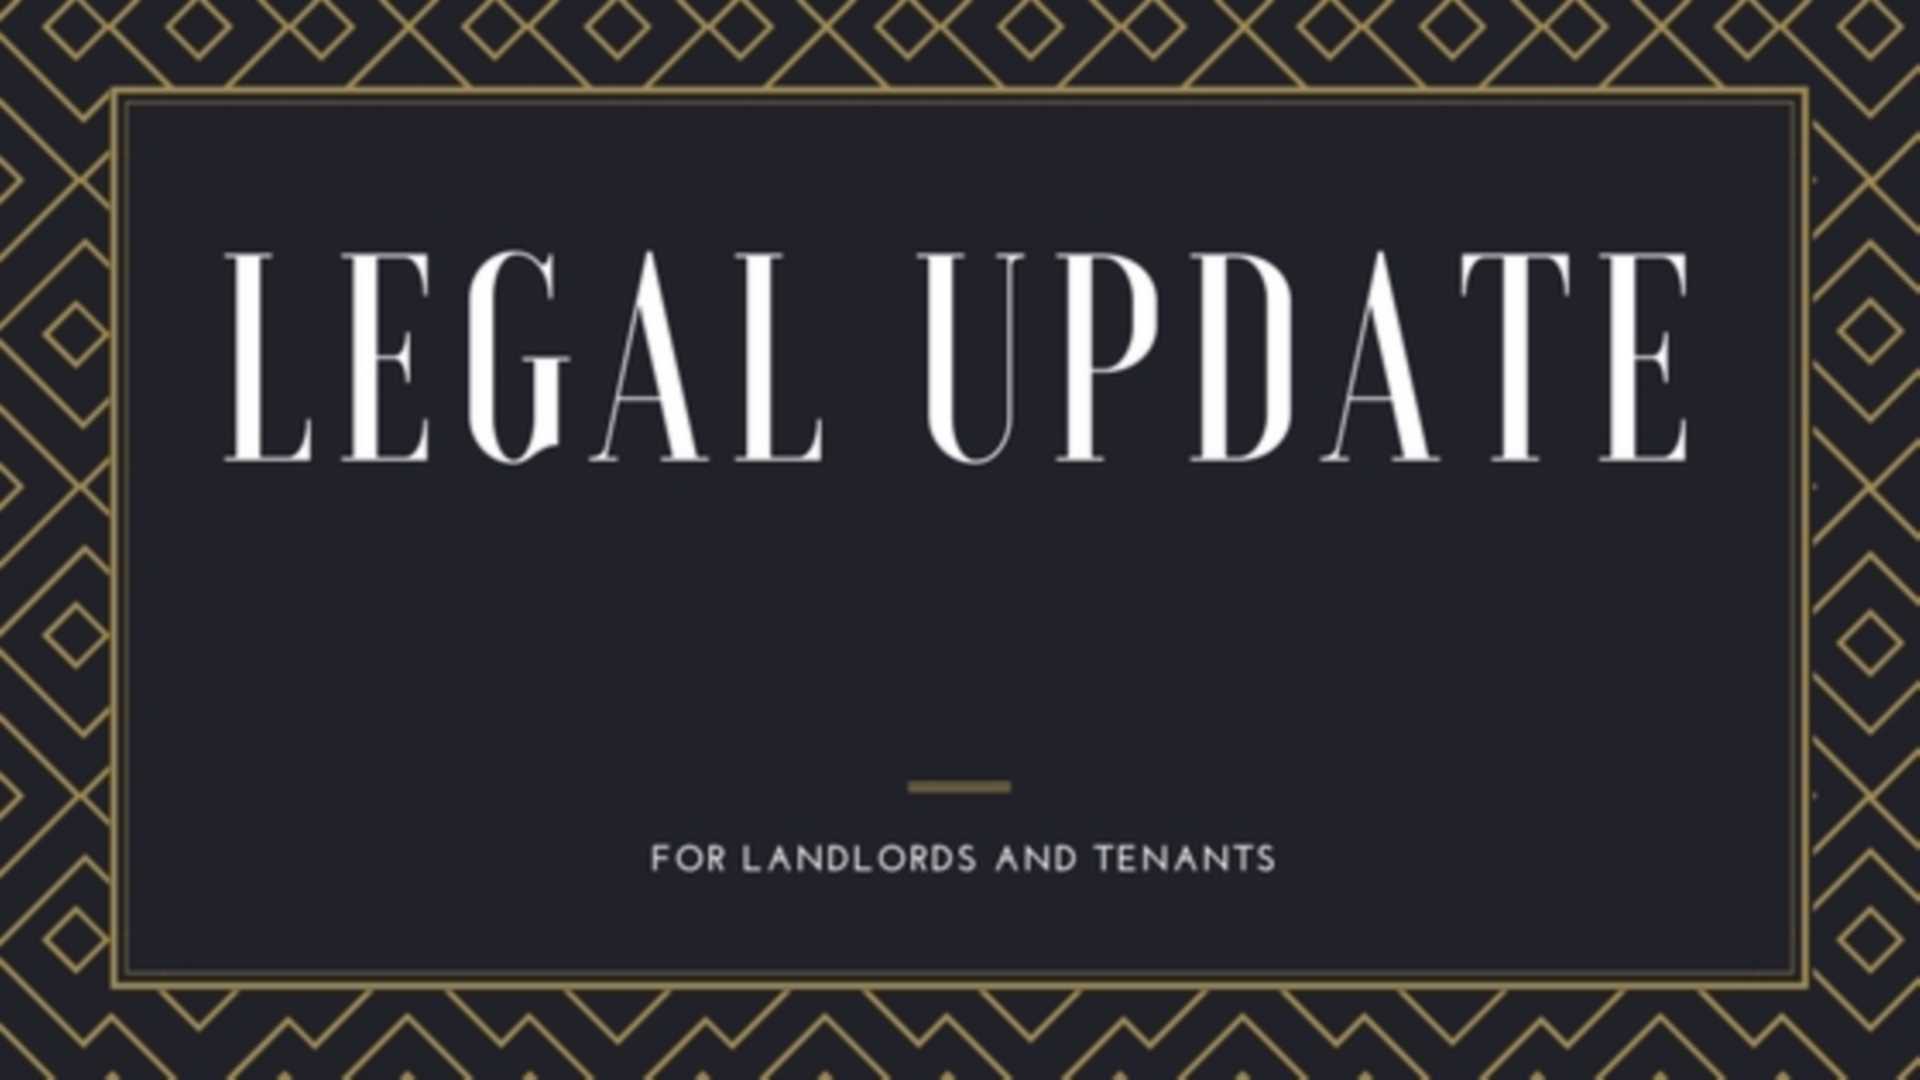 Important court ruling for landlords